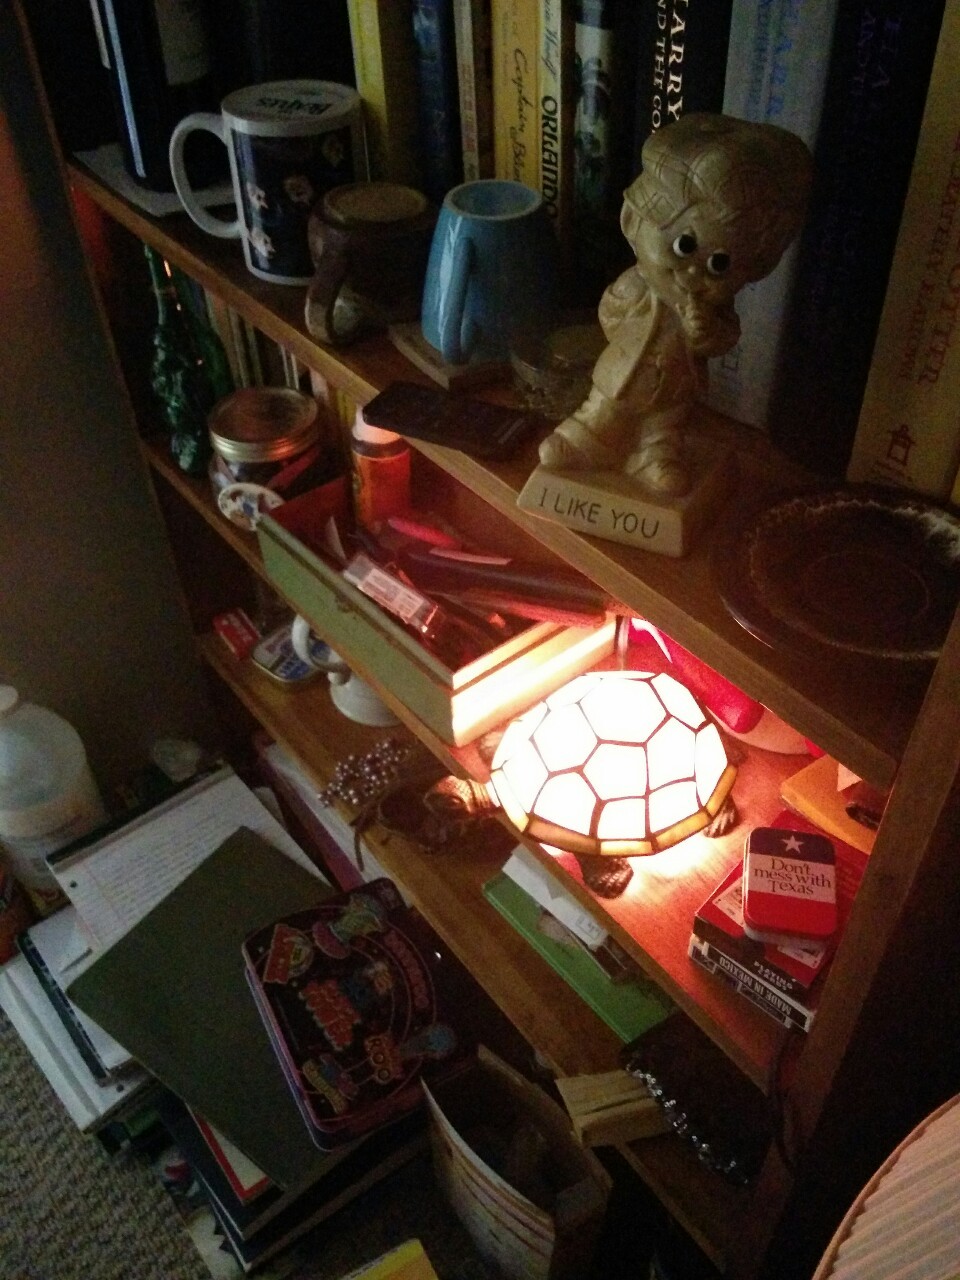 did I ever show you guys my book shelf full of things and my lamp which is shaped like a turtle